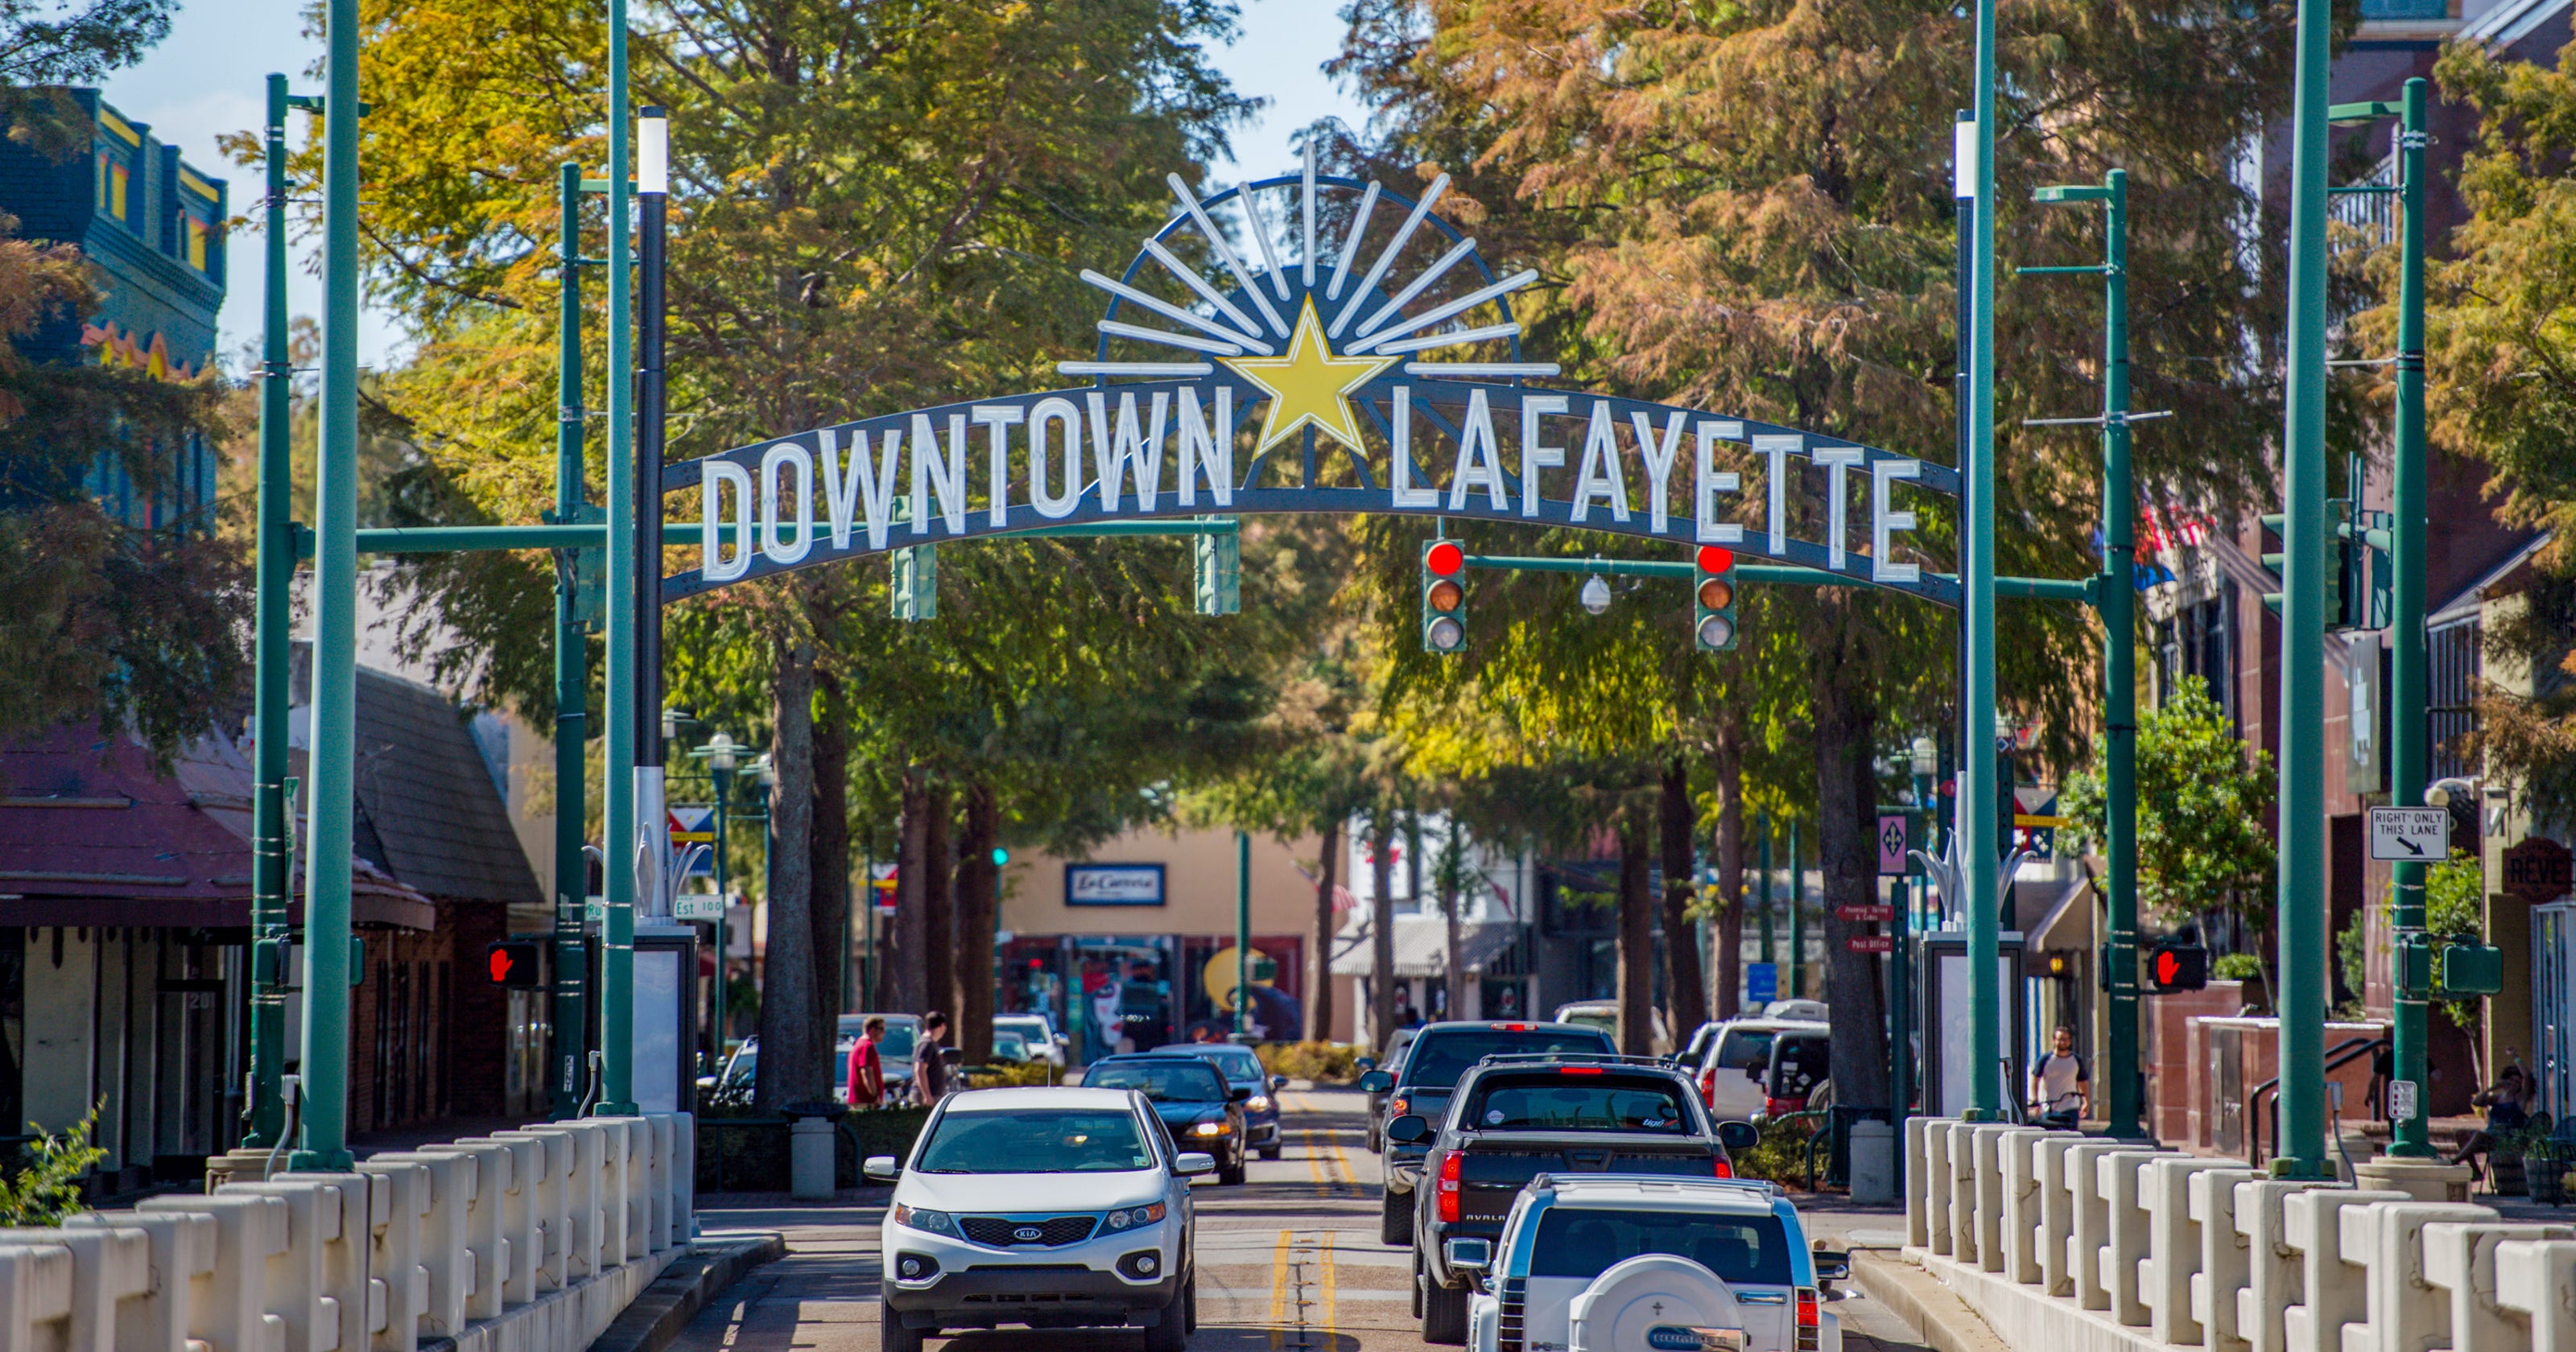 Parking in downtown Lafayette about to get a little easier